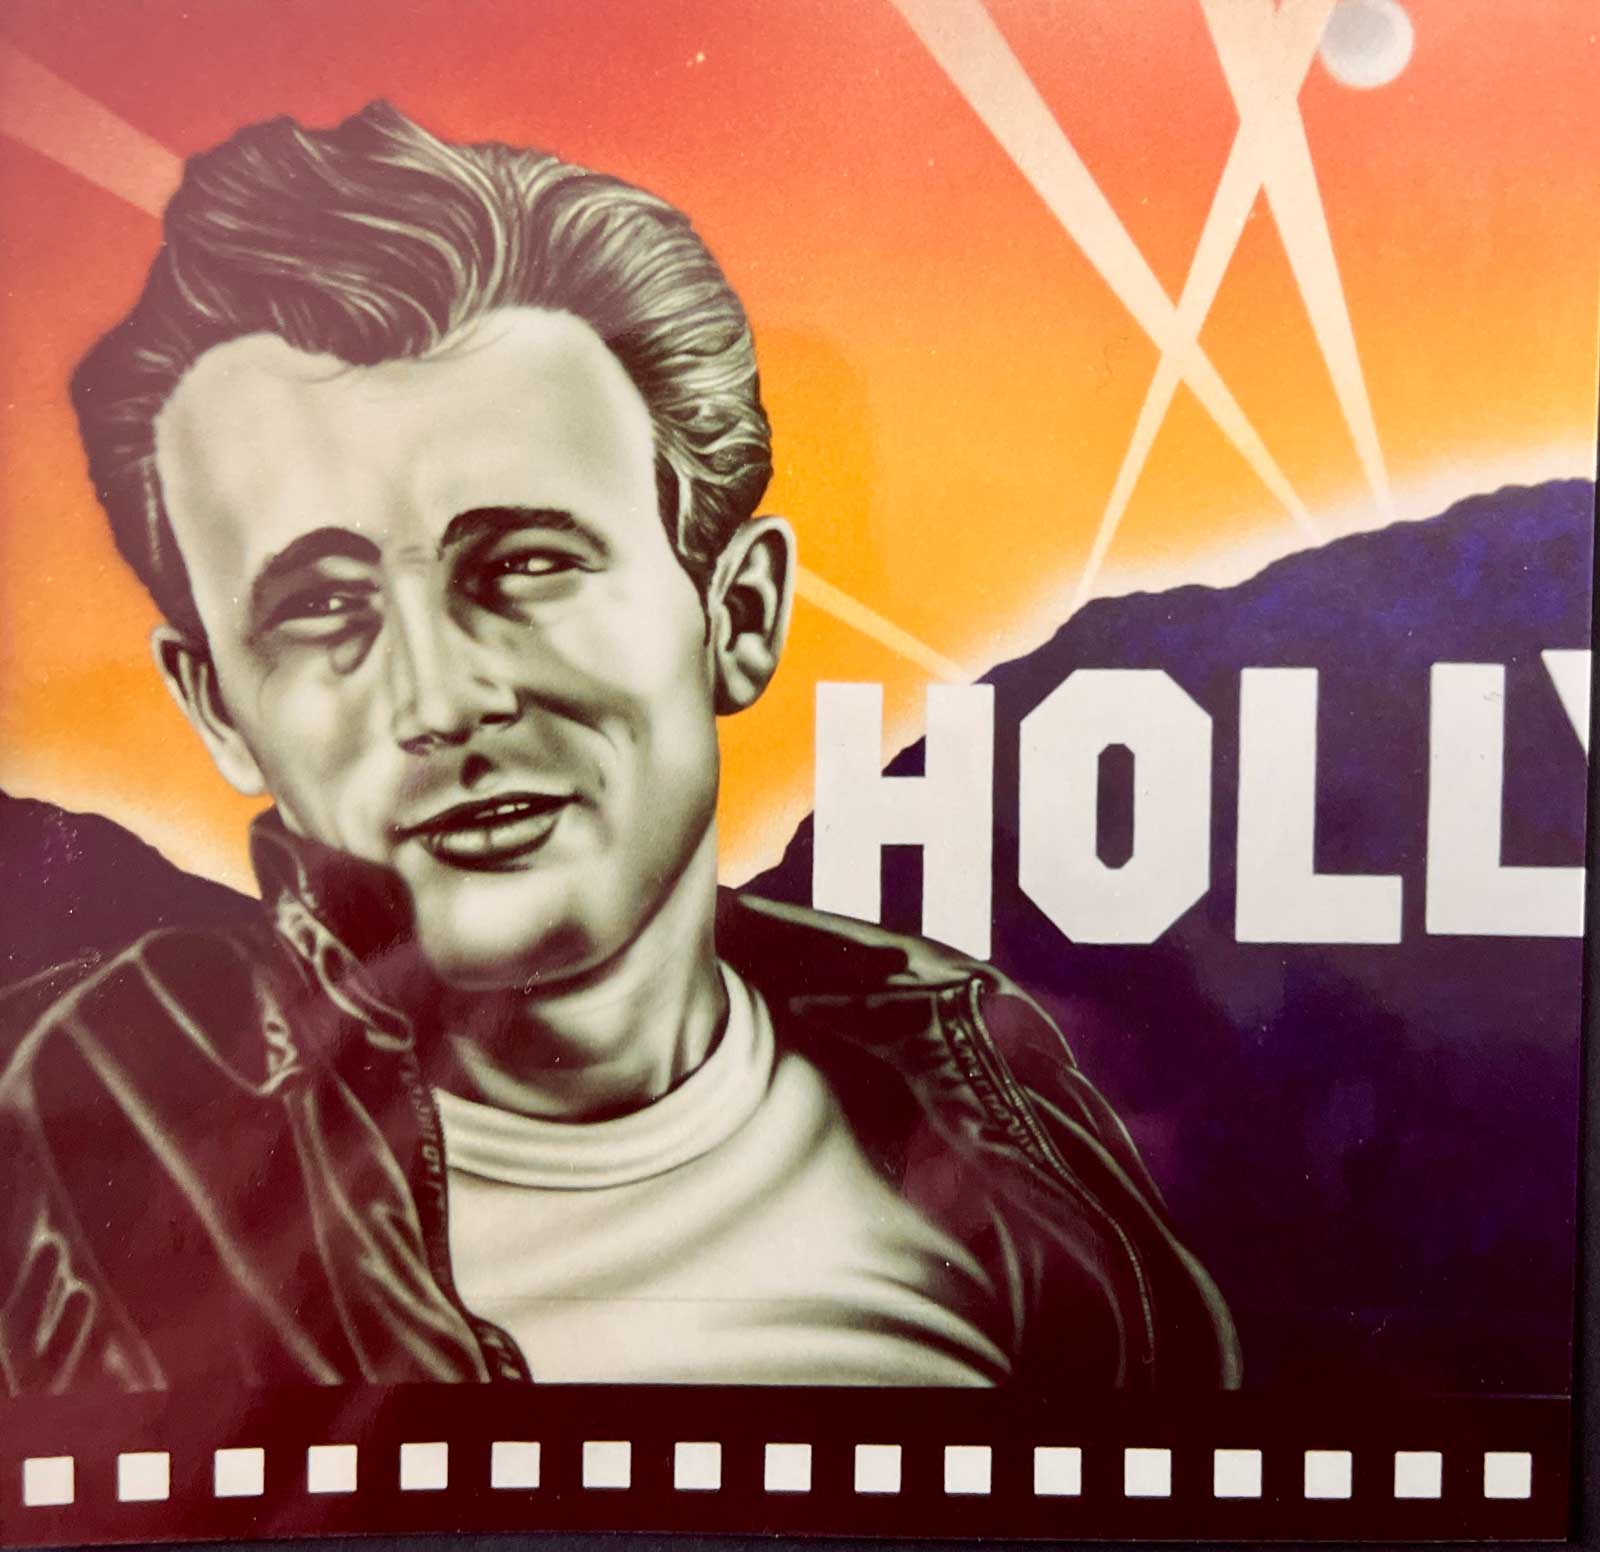 James Dean airbrushed mural by A.D. Cook